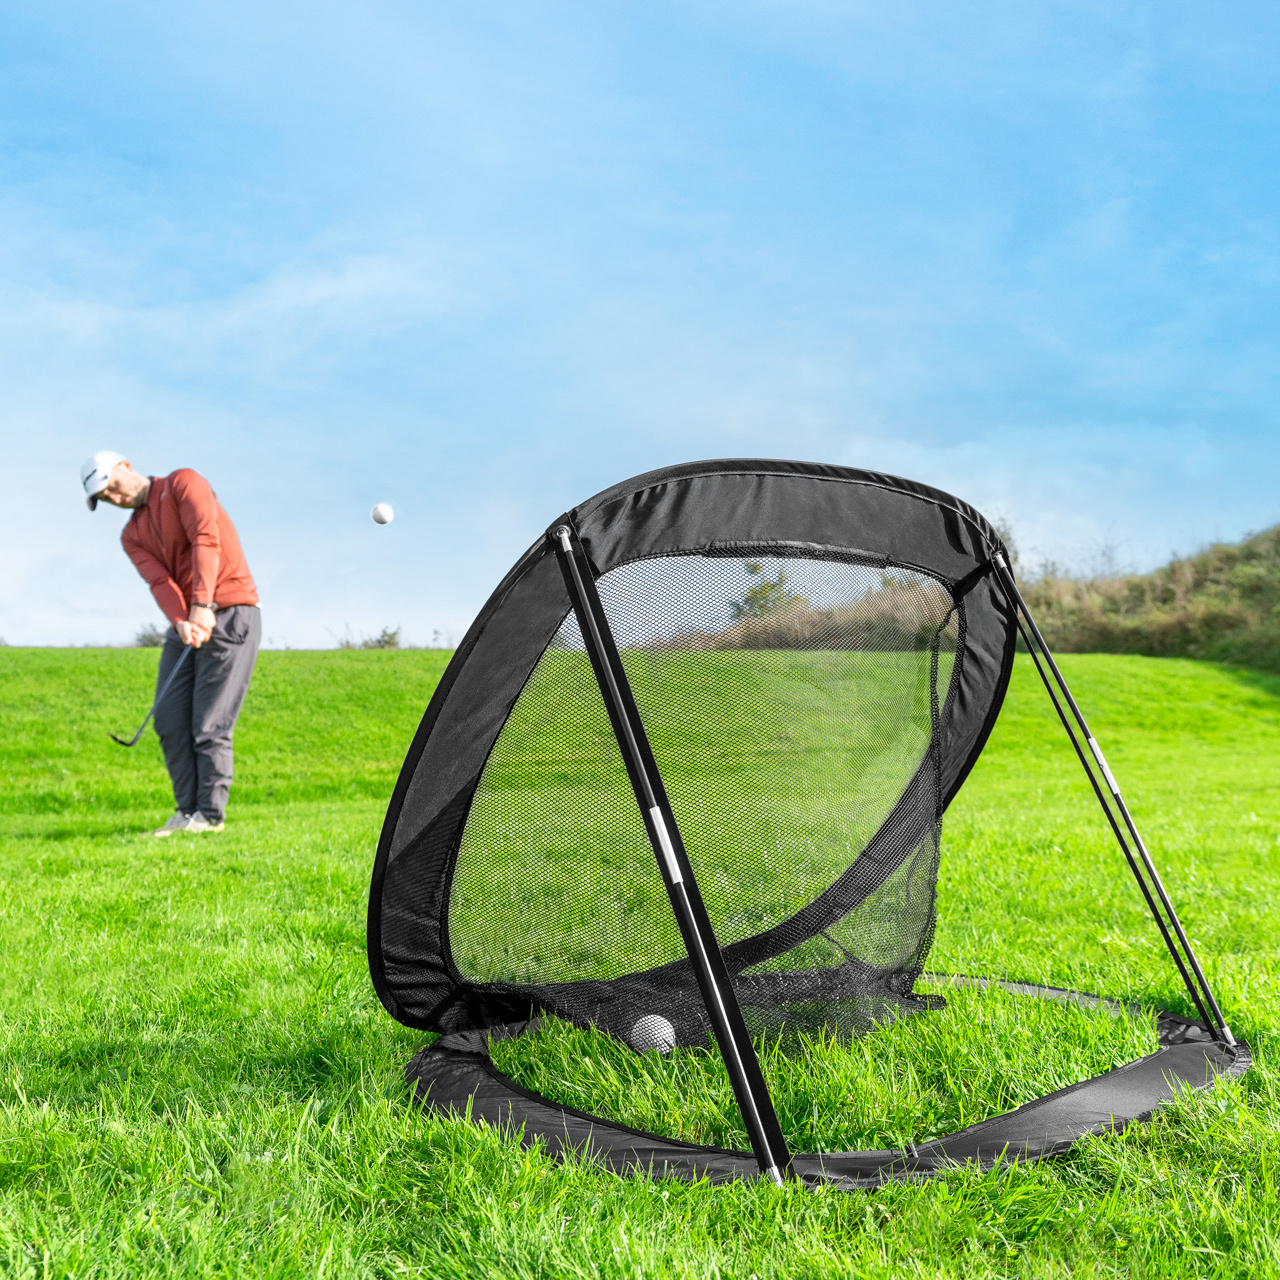 FORB Chipping Target Net